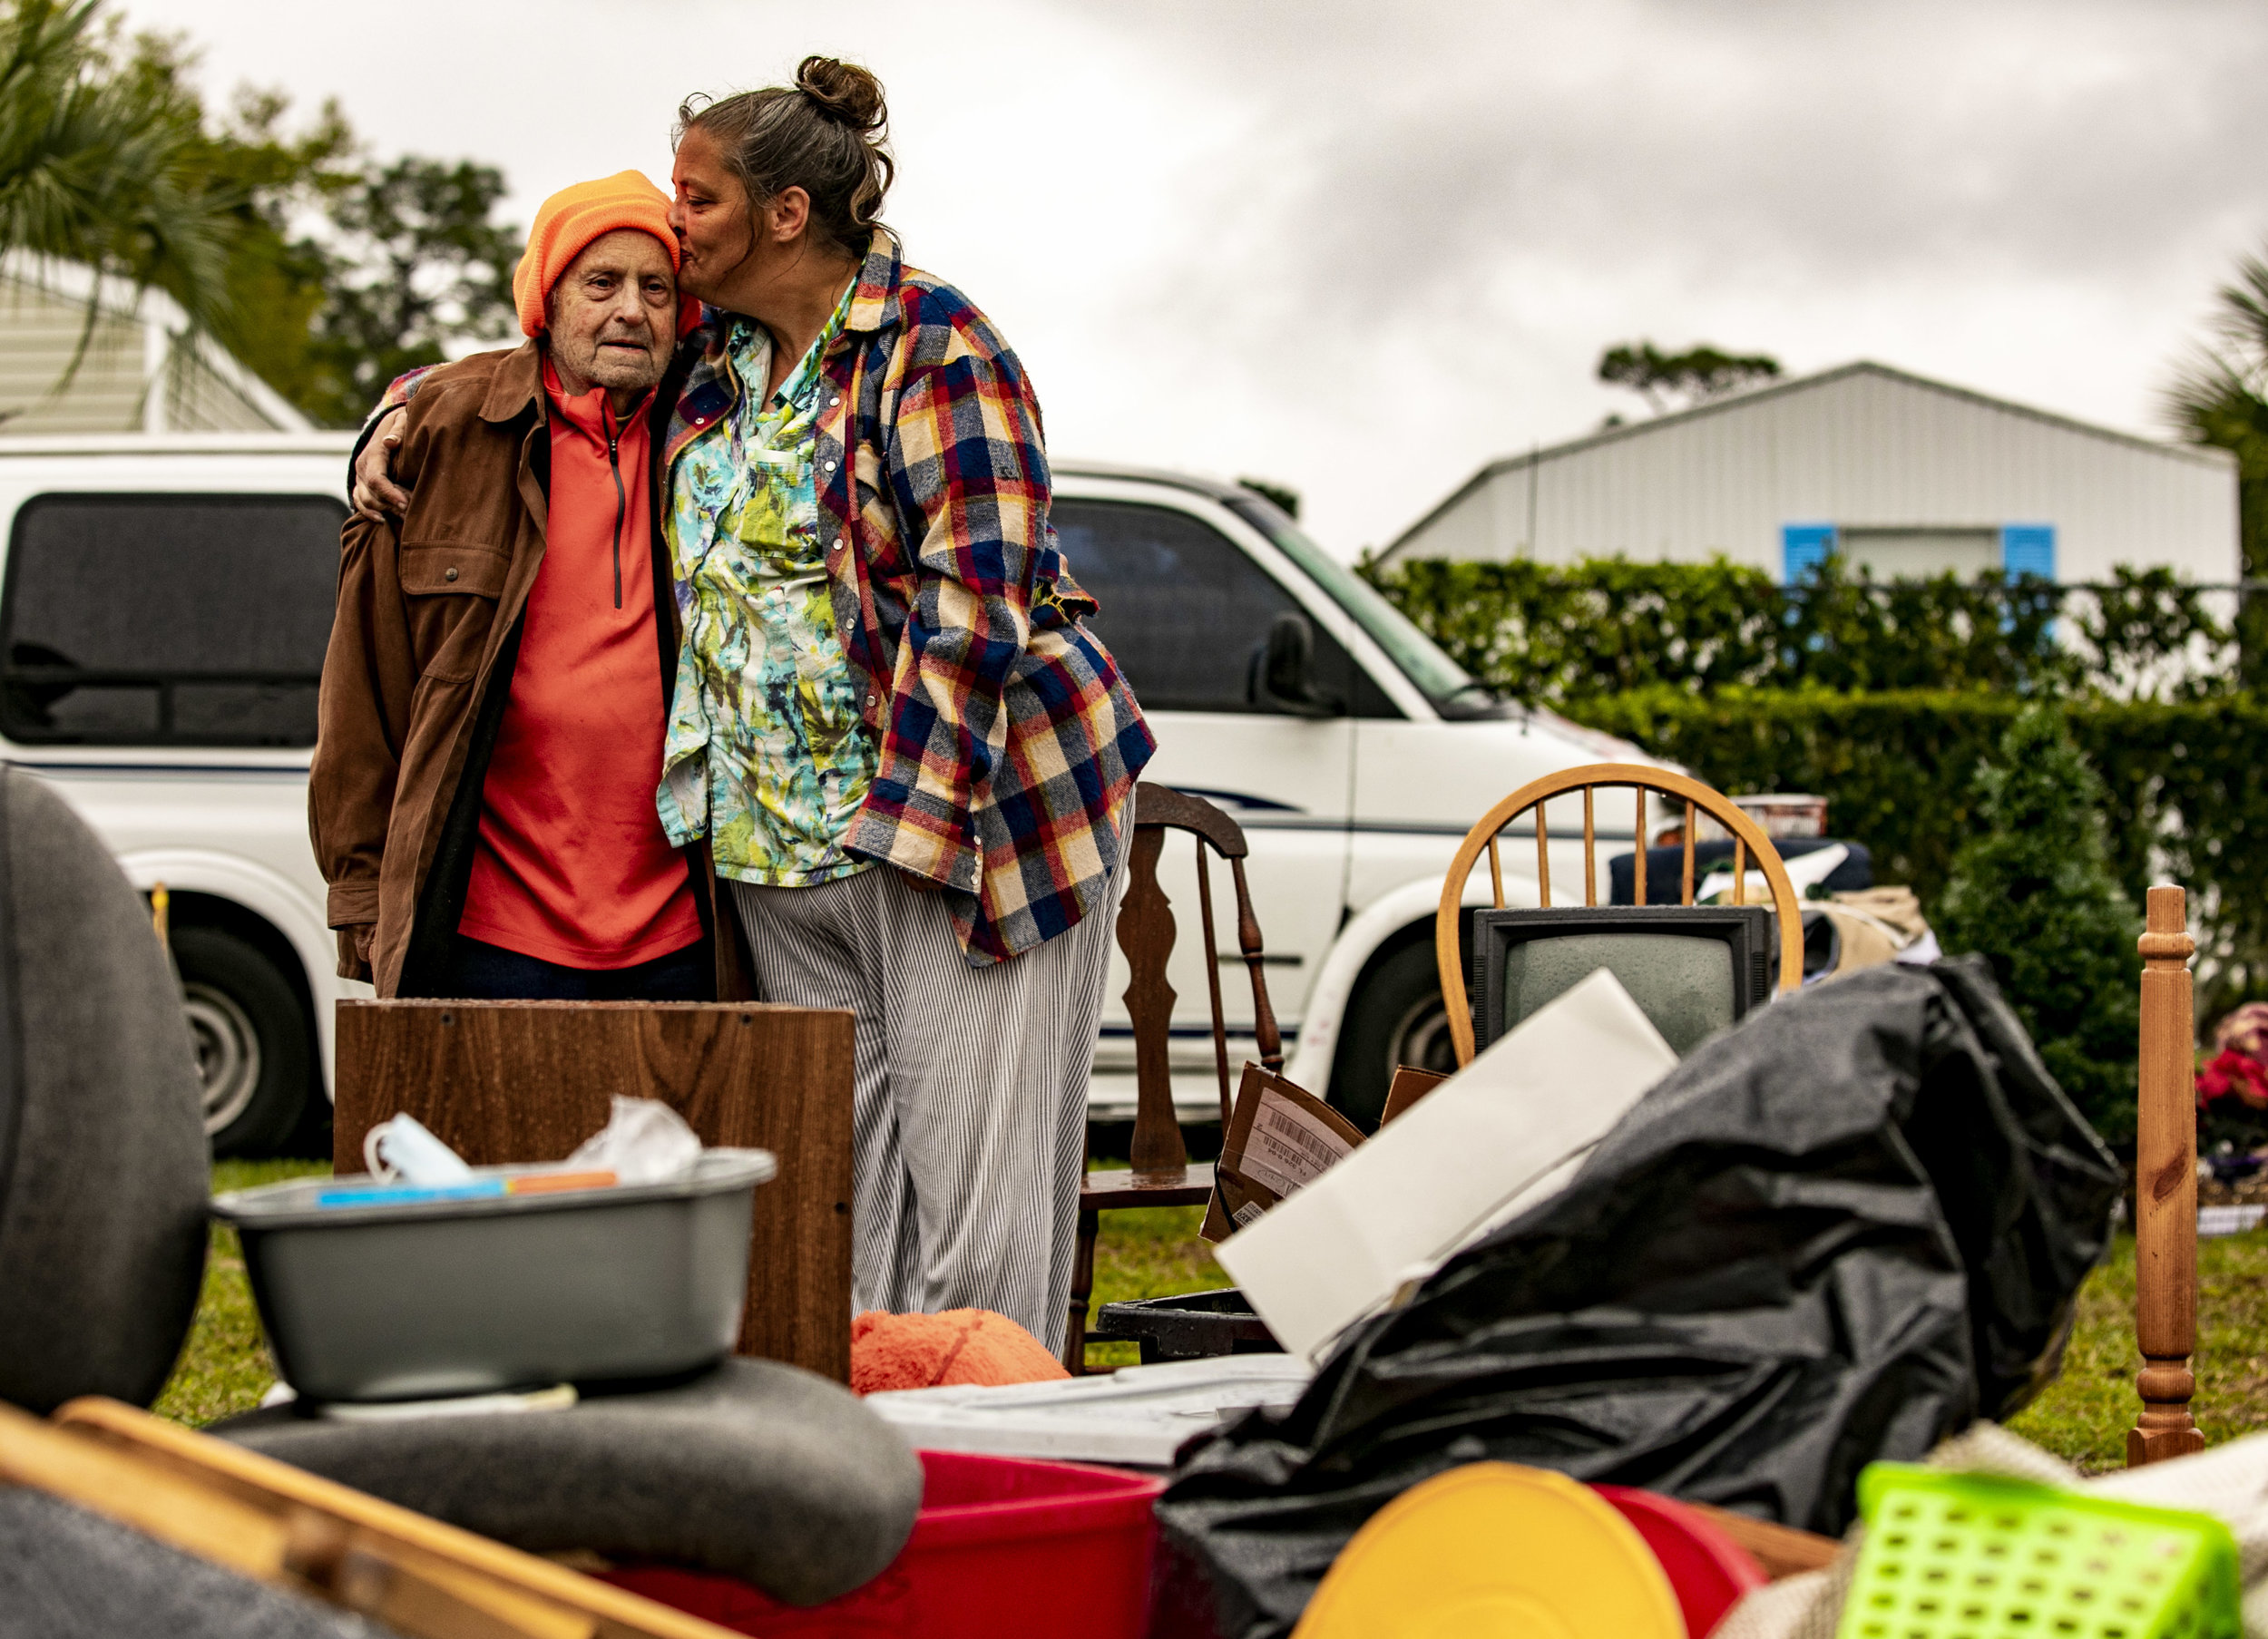  Carie Dineen kisses Robert Noebel as they stand among their belongings in the rain outside of The Palms of Archer on March 5, 2019. Noebel and Dineen were evicted and were attempting to sell their belonging that were strewn across the side of Archer